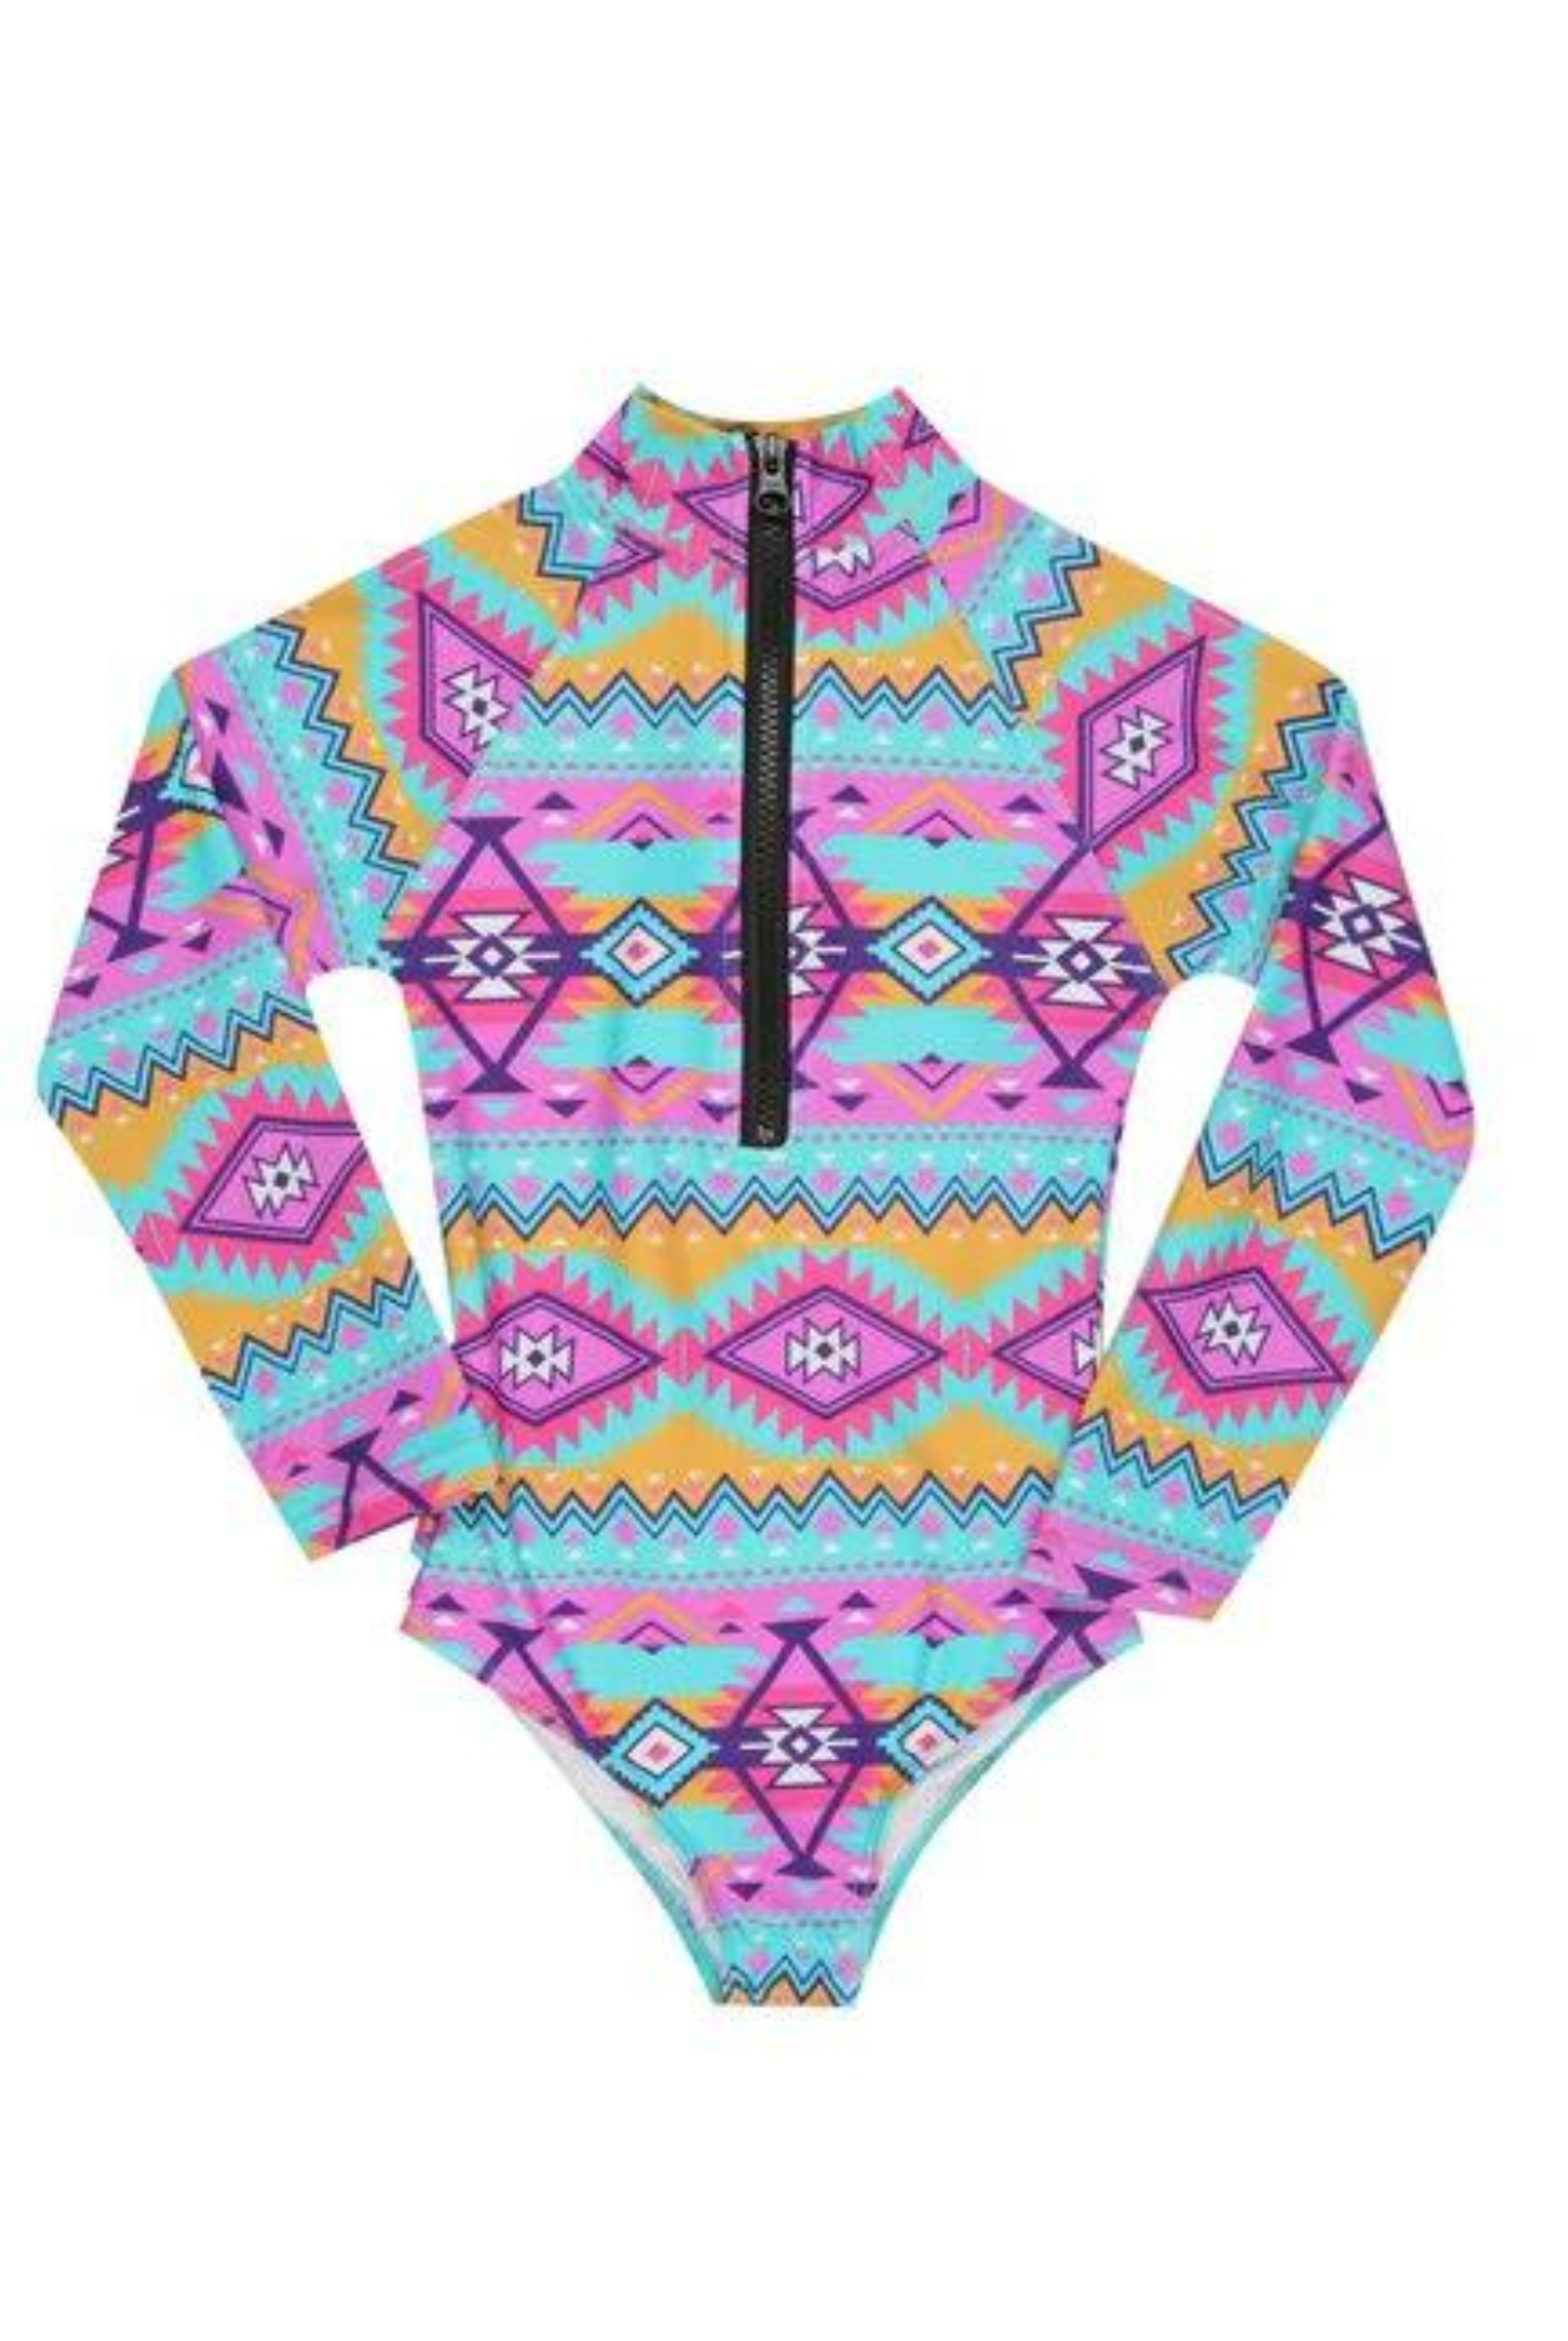 Tozi Blake surf suit from Infamous Swim